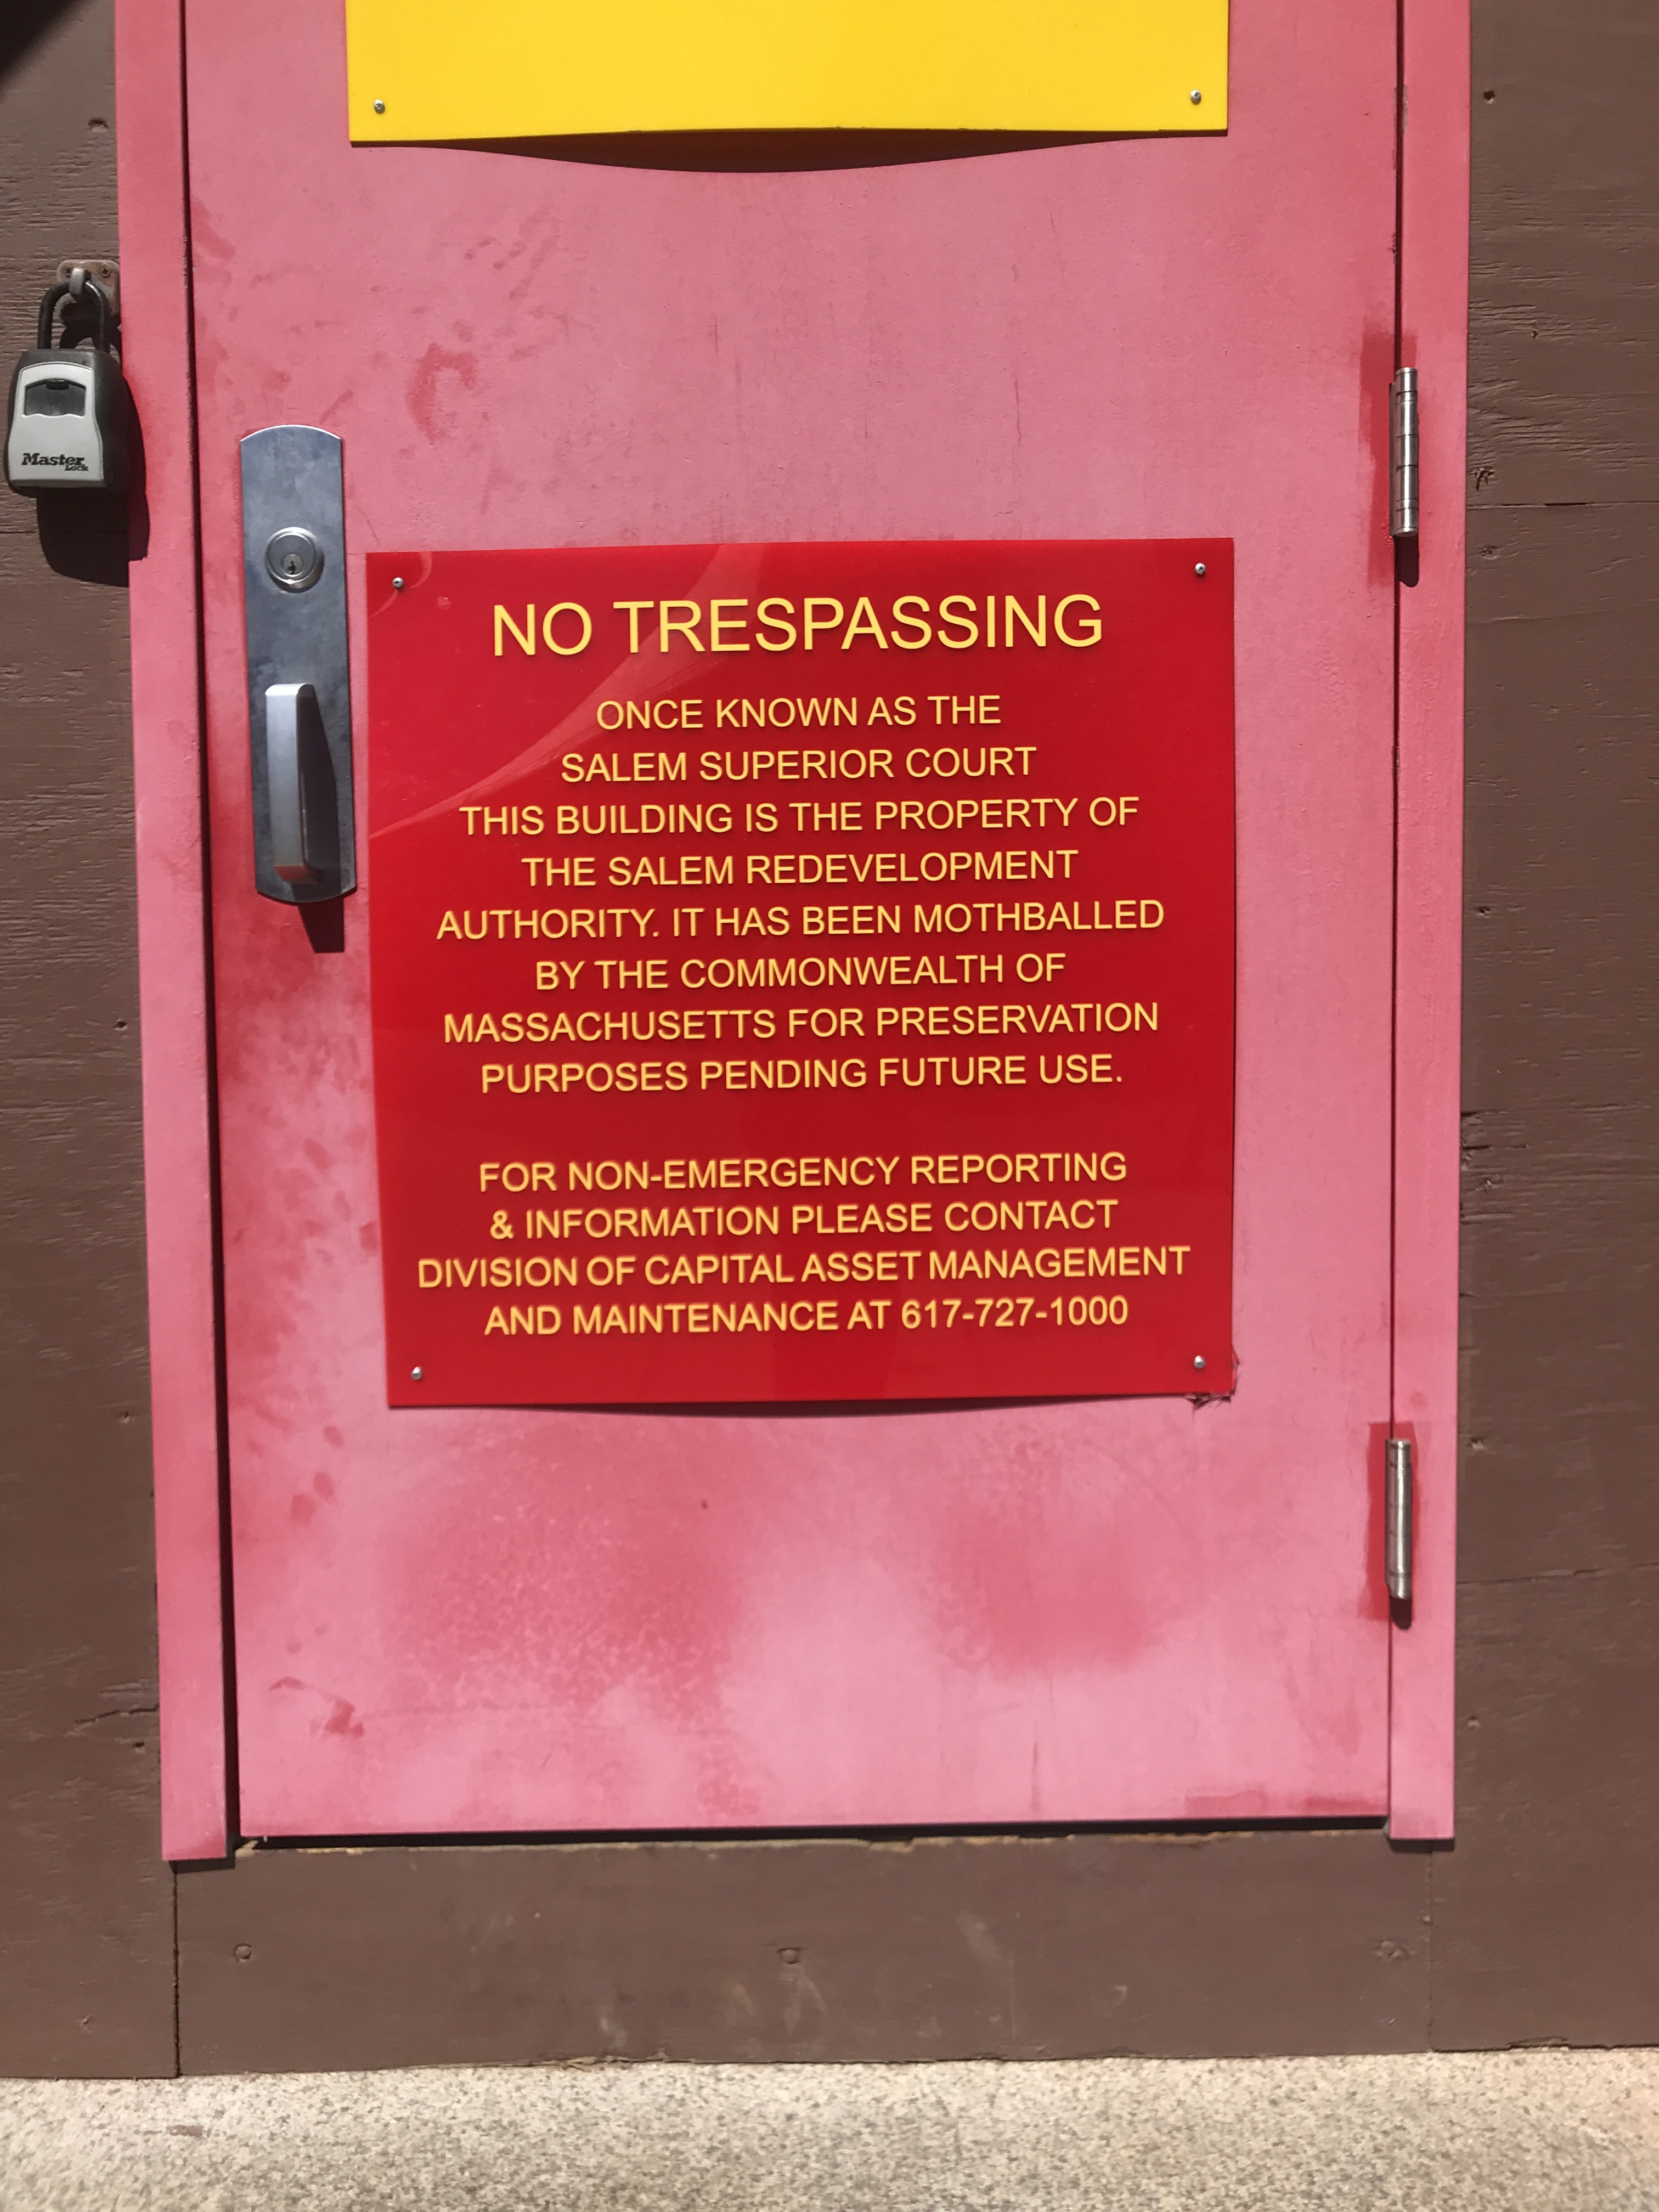 A shiny plastic sign on a faded red-painted door reads 'NO TRESPASSING / Once known as the Salem Superior Court / this building is the property of the Salem Redevelopment Authority. It has been mothballed by the Commonwealth of Massachusetts for preservation purposes pending future use/ For non-emergency reporting & information please contact division of capital asset management and maintenance at 617-727-1000'